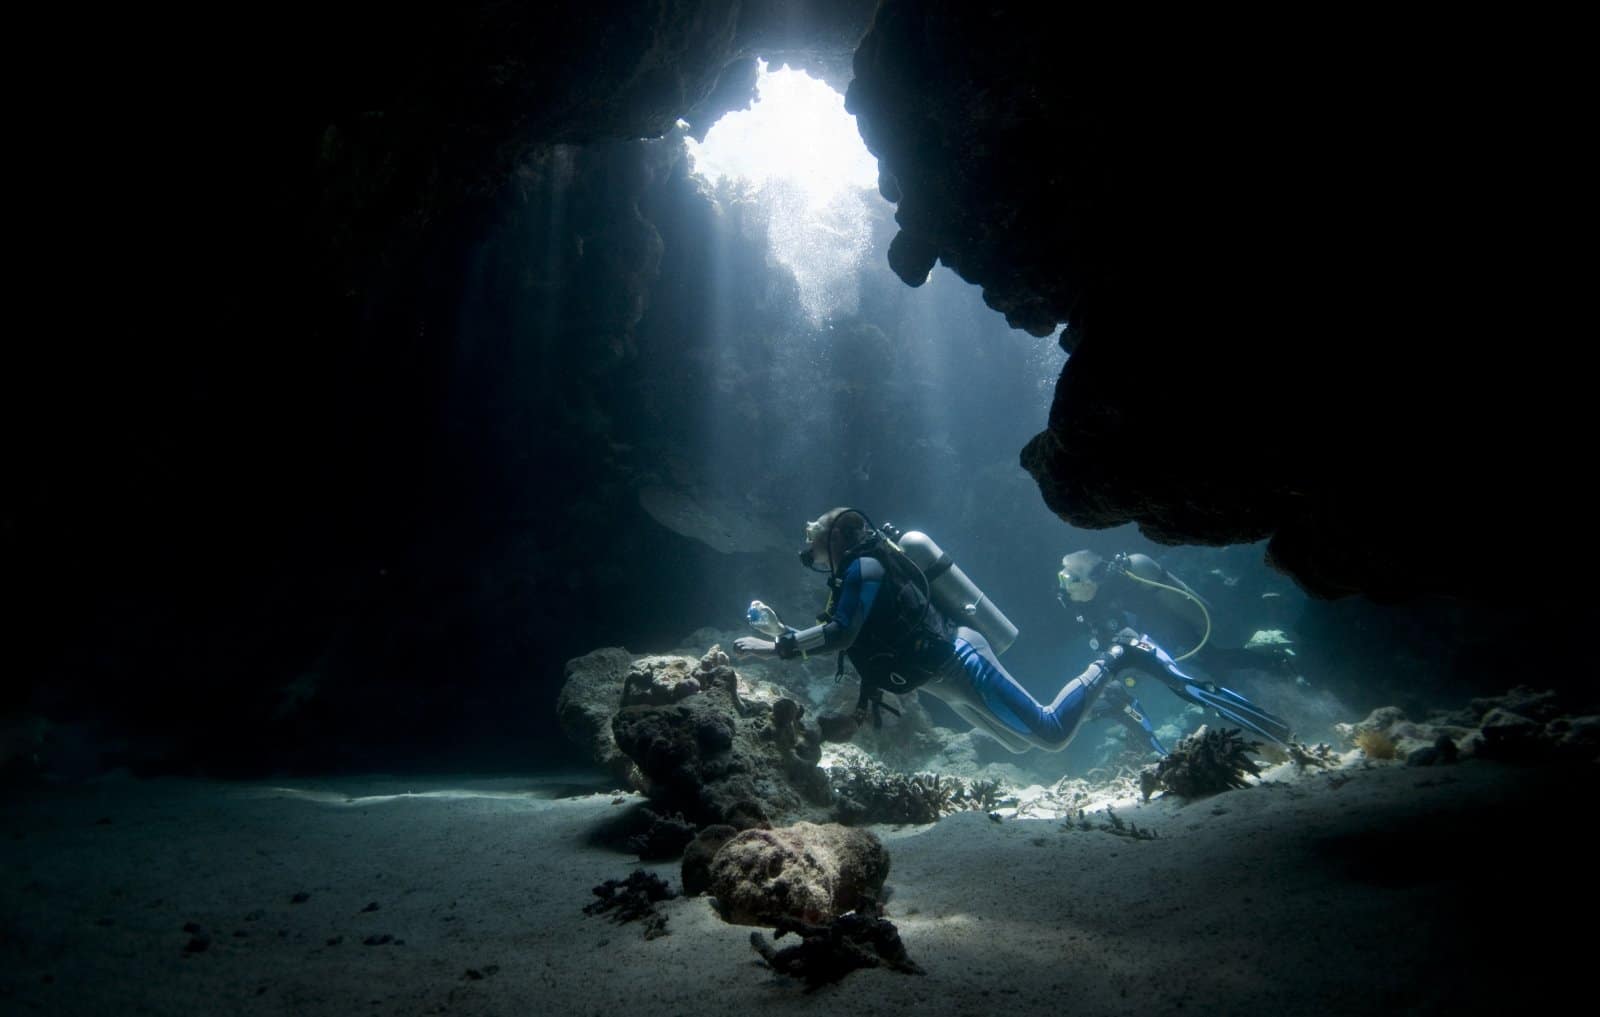 <p class="wp-caption-text">Image Credit: Shutterstock / Dray van Beeck</p>  <p><span>PADI offers a range of Specialty Diver courses that allow you to focus on specific interests or diving environments. Examples include Deep Diver, Nitrox Diver, Digital Underwater Photographer, Ice Diver, Cave Diver, and many more. Each specialty course focuses on a particular aspect of diving, providing the skills and knowledge to explore specific environments or engage in activities such as underwater photography or videography, deep diving, or night diving. These courses vary in length and requirements, with some necessitating multiple dives over several days.</span></p> <p><b>Insider’s Tip:</b><span> When choosing a specialty course, consider both your personal interests and the types of diving you plan to do in the future. Also, think about how a particular specialty might enhance your overall diving capabilities. For instance, the Nitrox Diver course is popular because diving with enriched air nitrox can extend your no-decompression limits, allowing you to enjoy longer dives.</span></p>